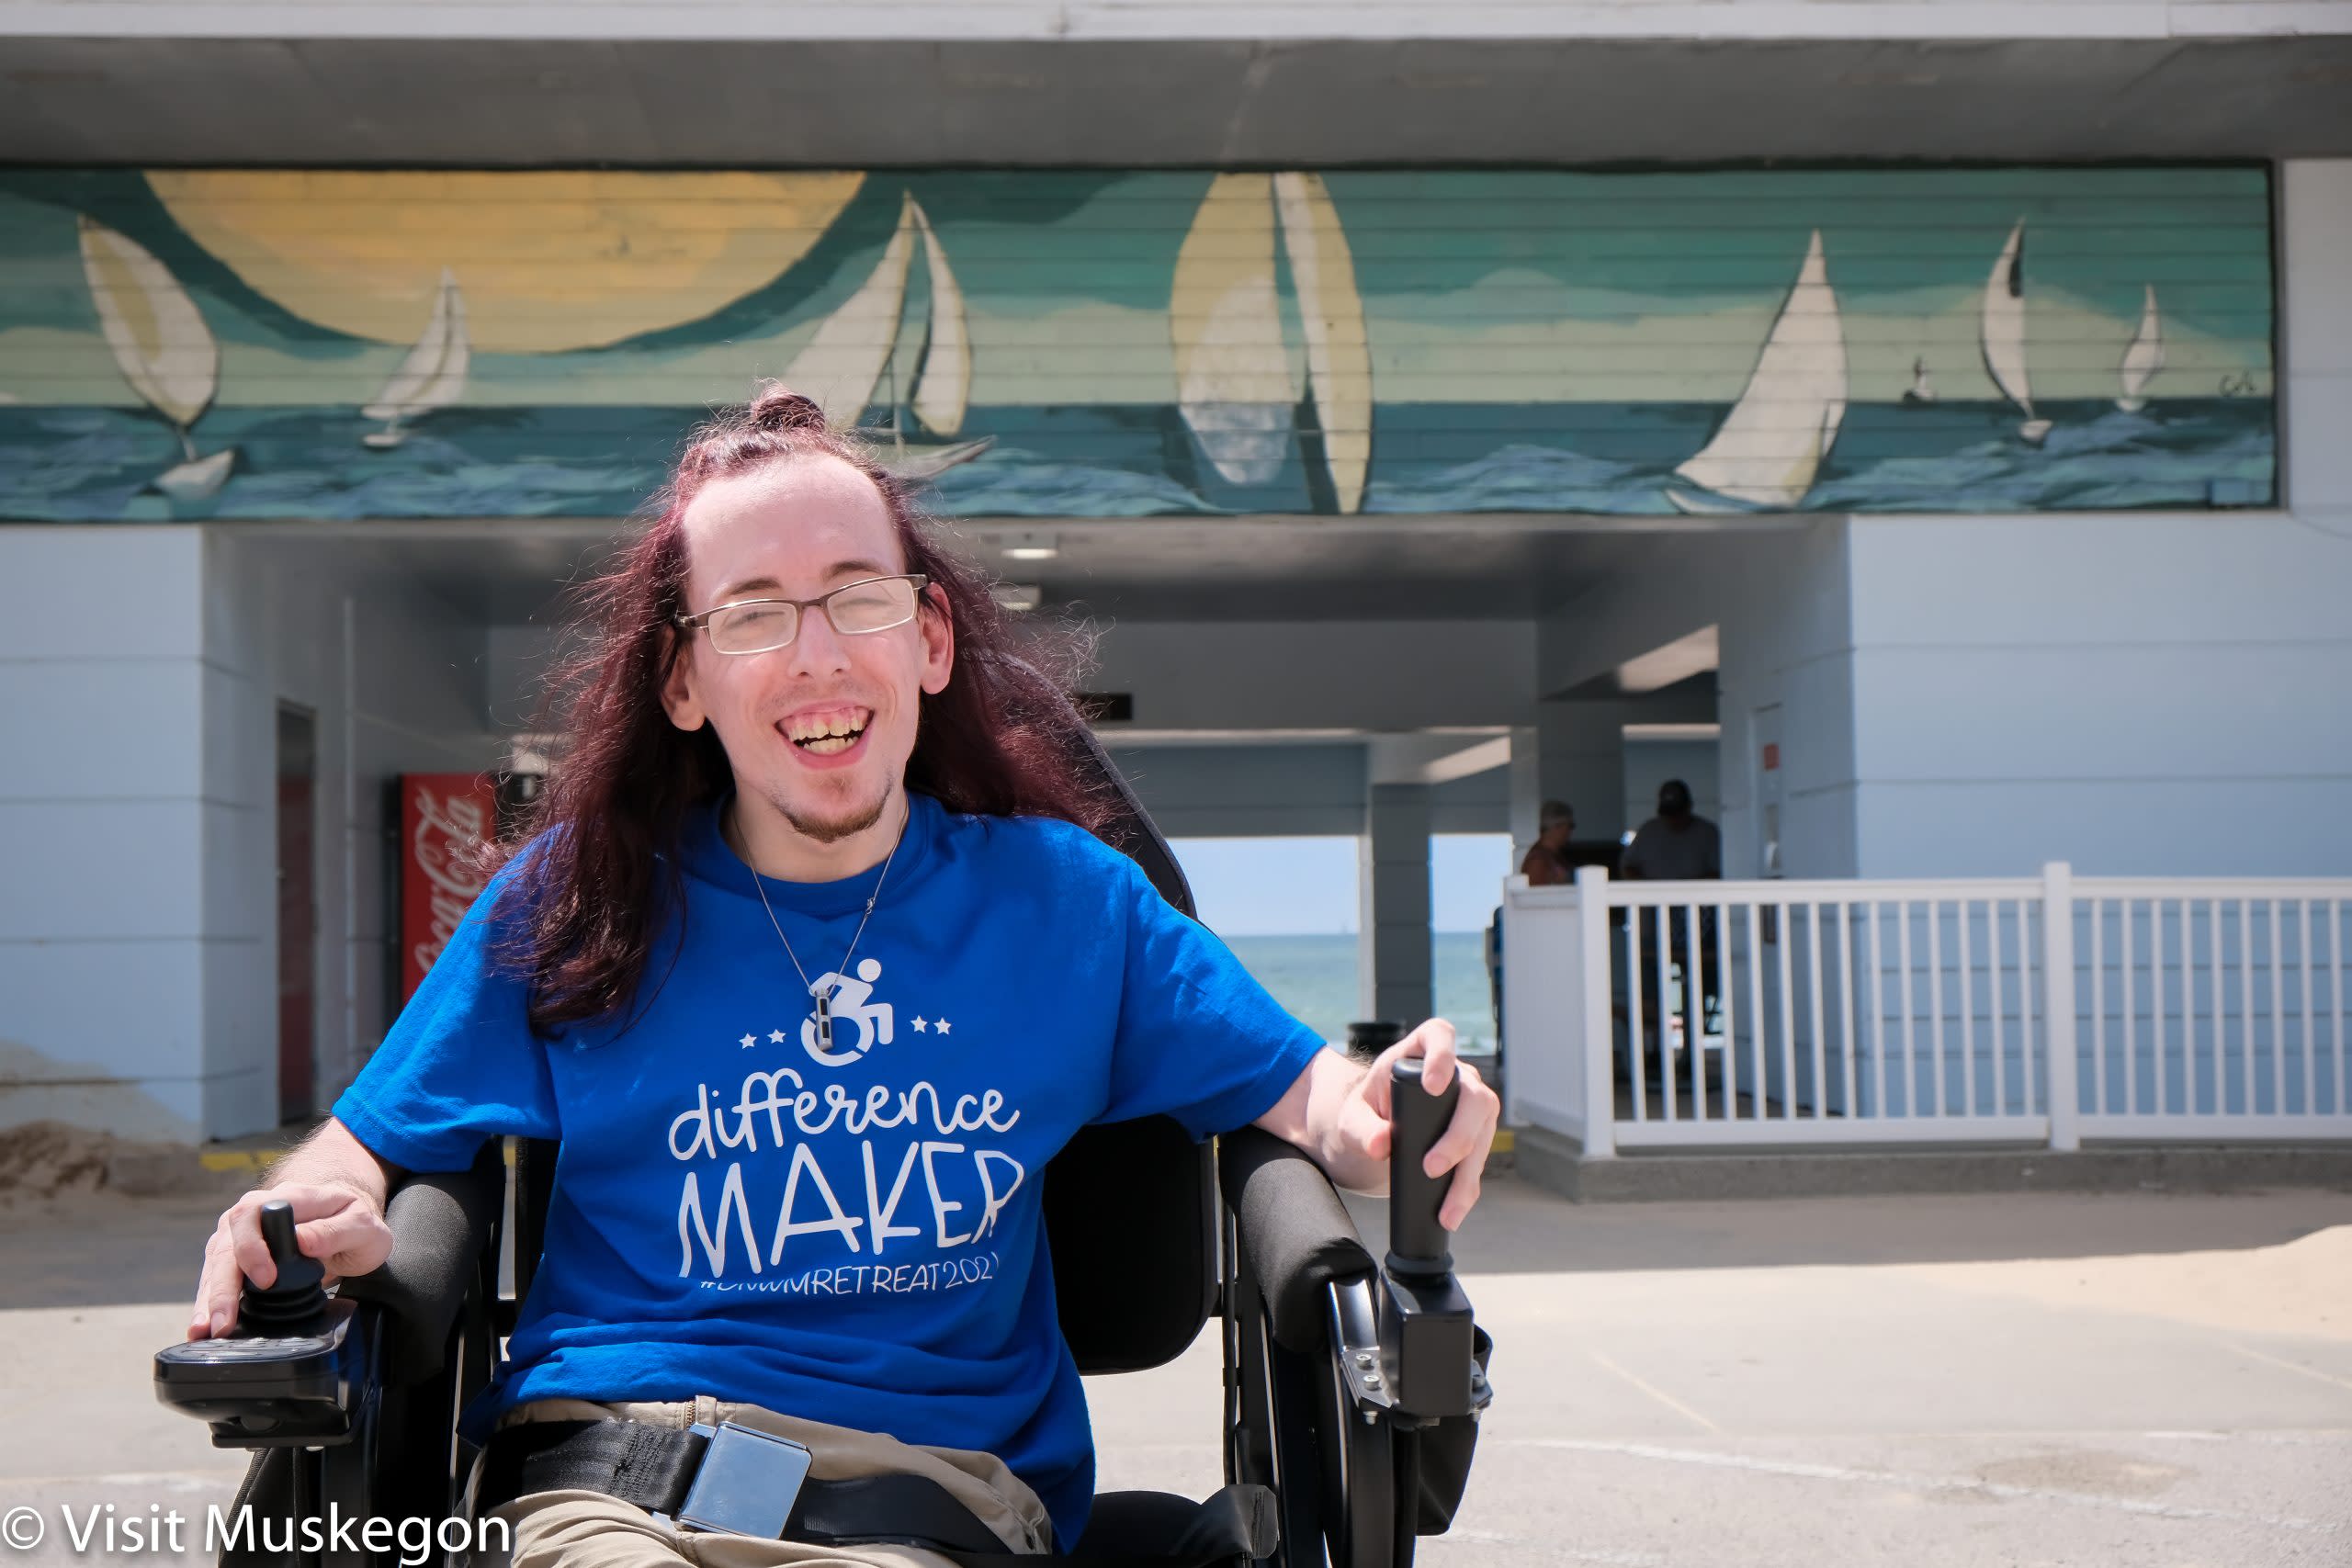 smiling young man is seated in a TrackChair with beach bathhouse in he background. His blue tee shirt says "difference maker. A mural of sailboats is above his head